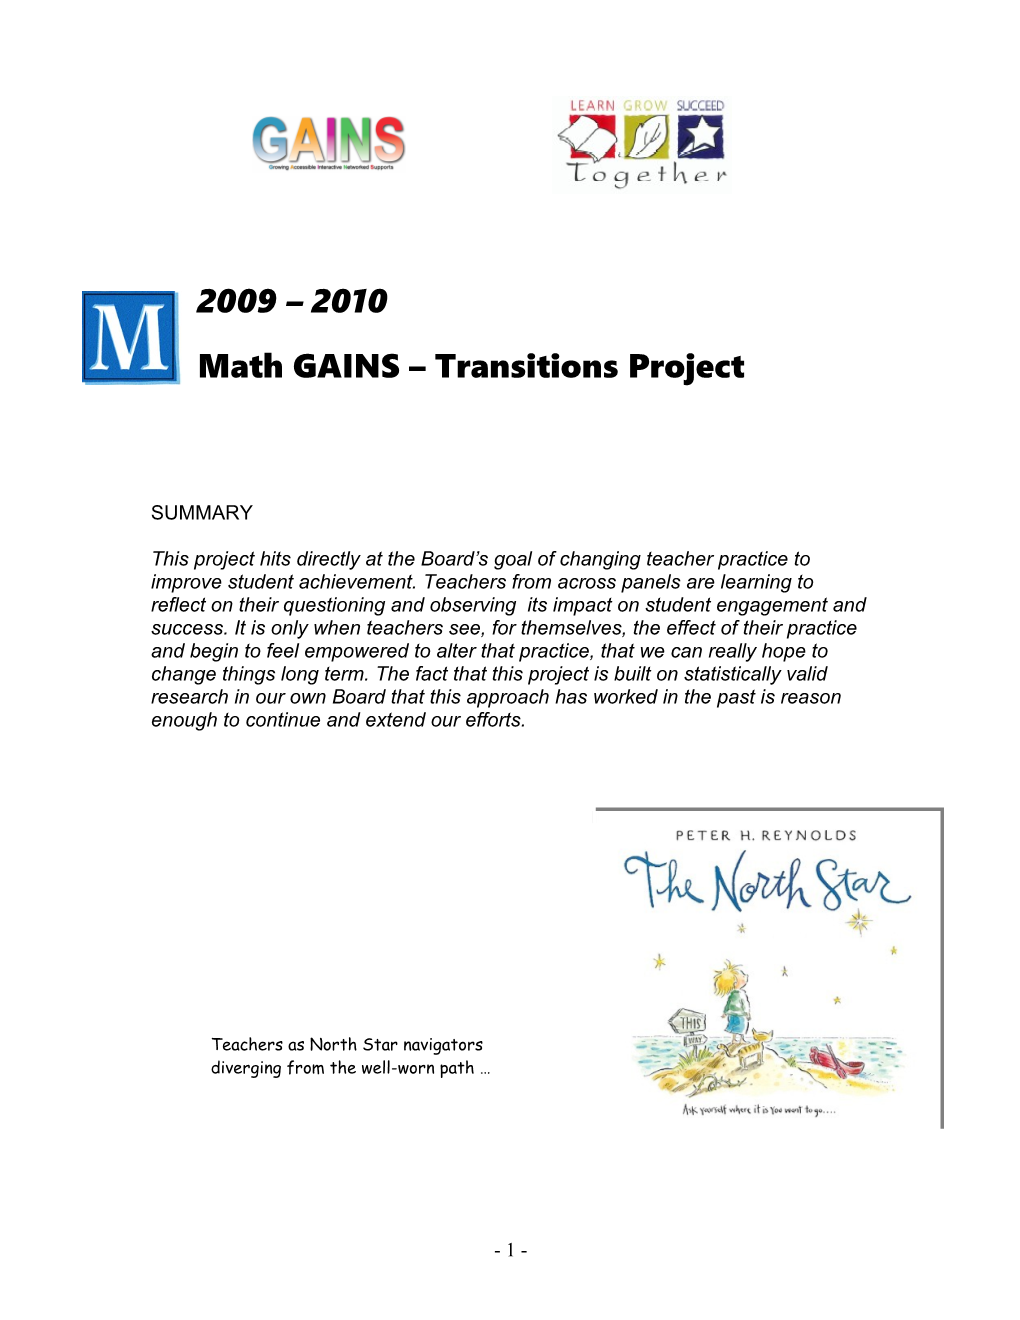 Math GAINS Transitions Project